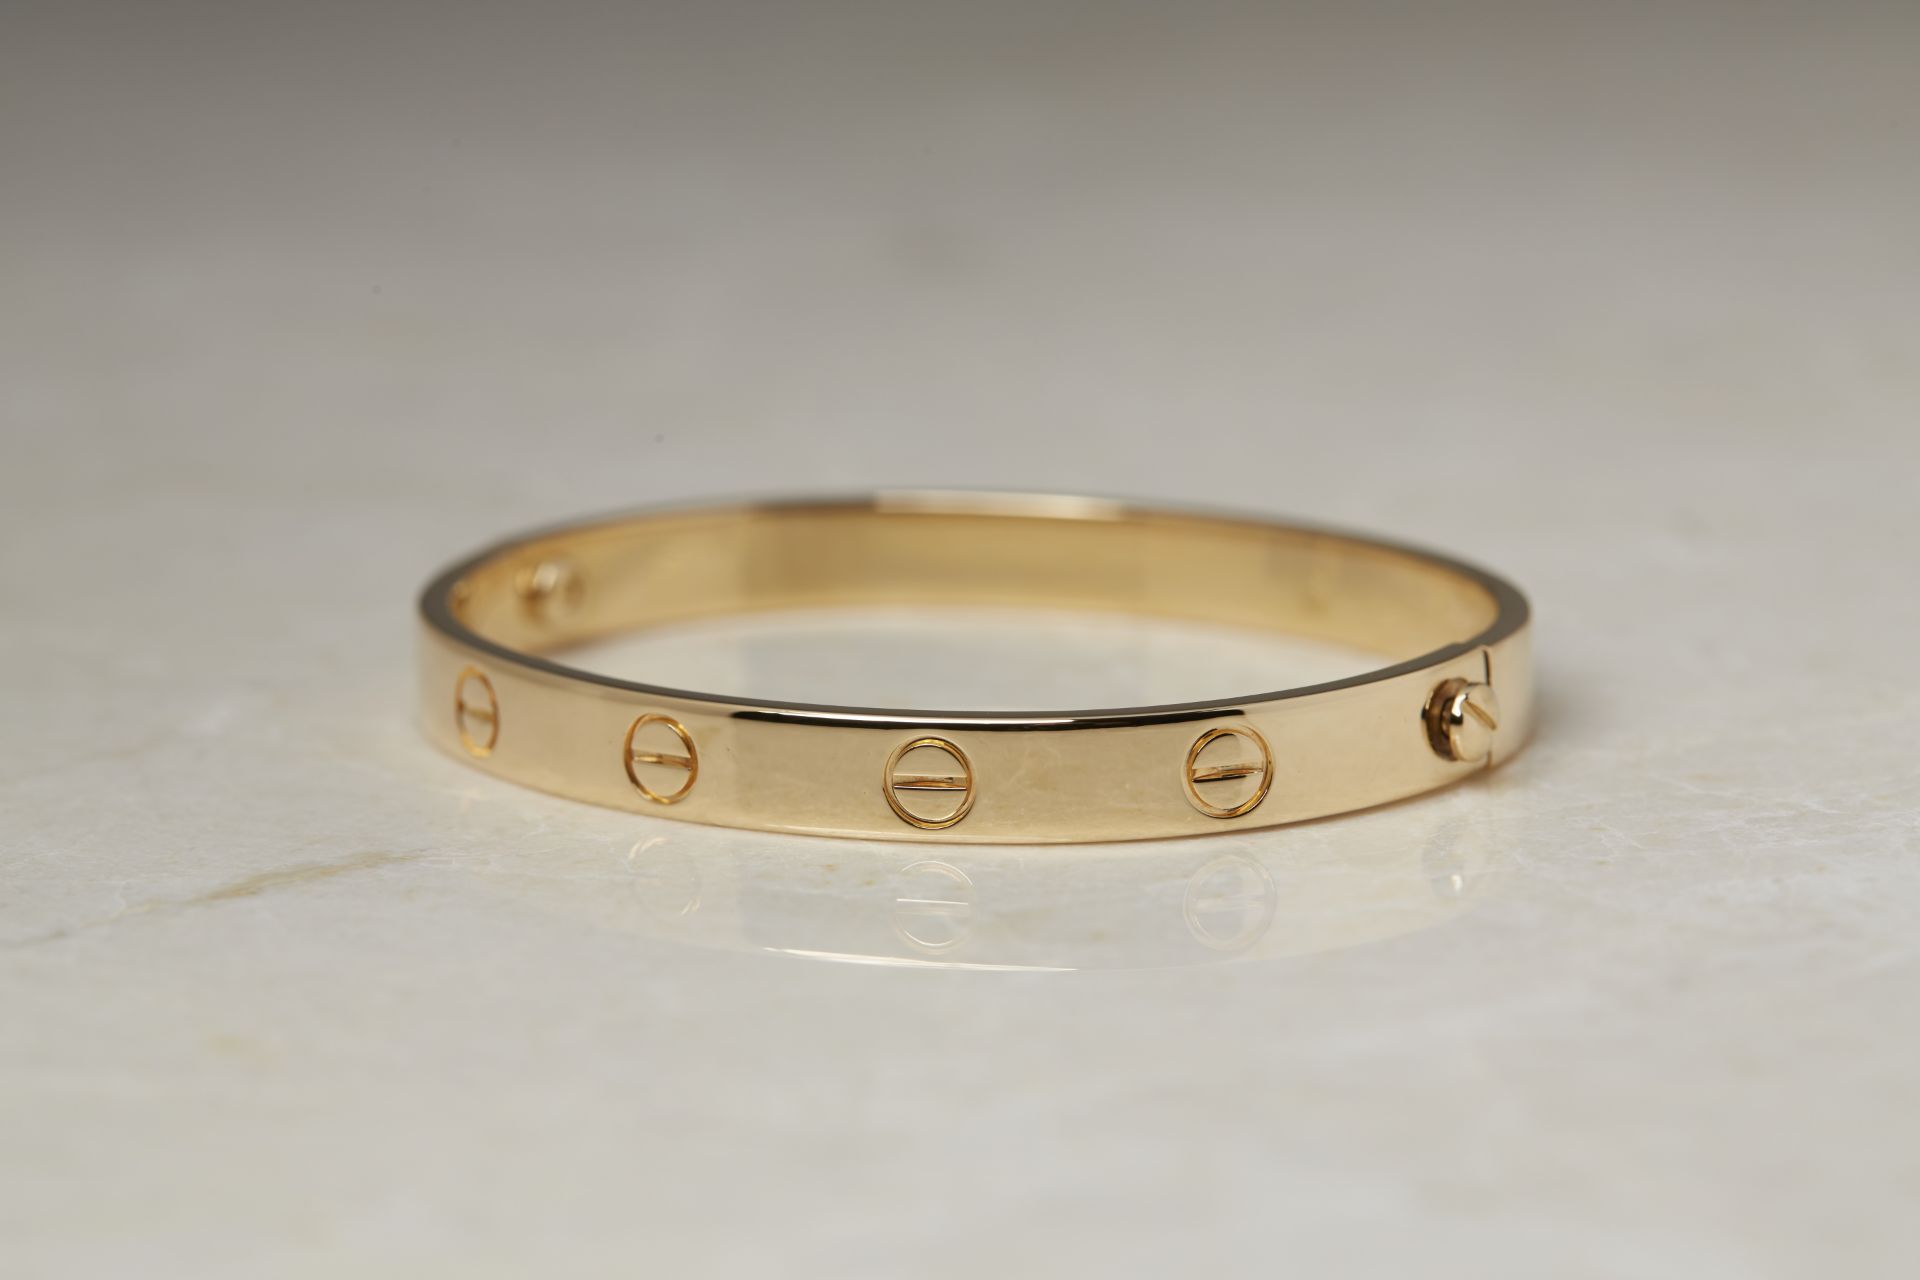 Cartier 18k Yellow Gold Love Bangle - Image 2 of 8